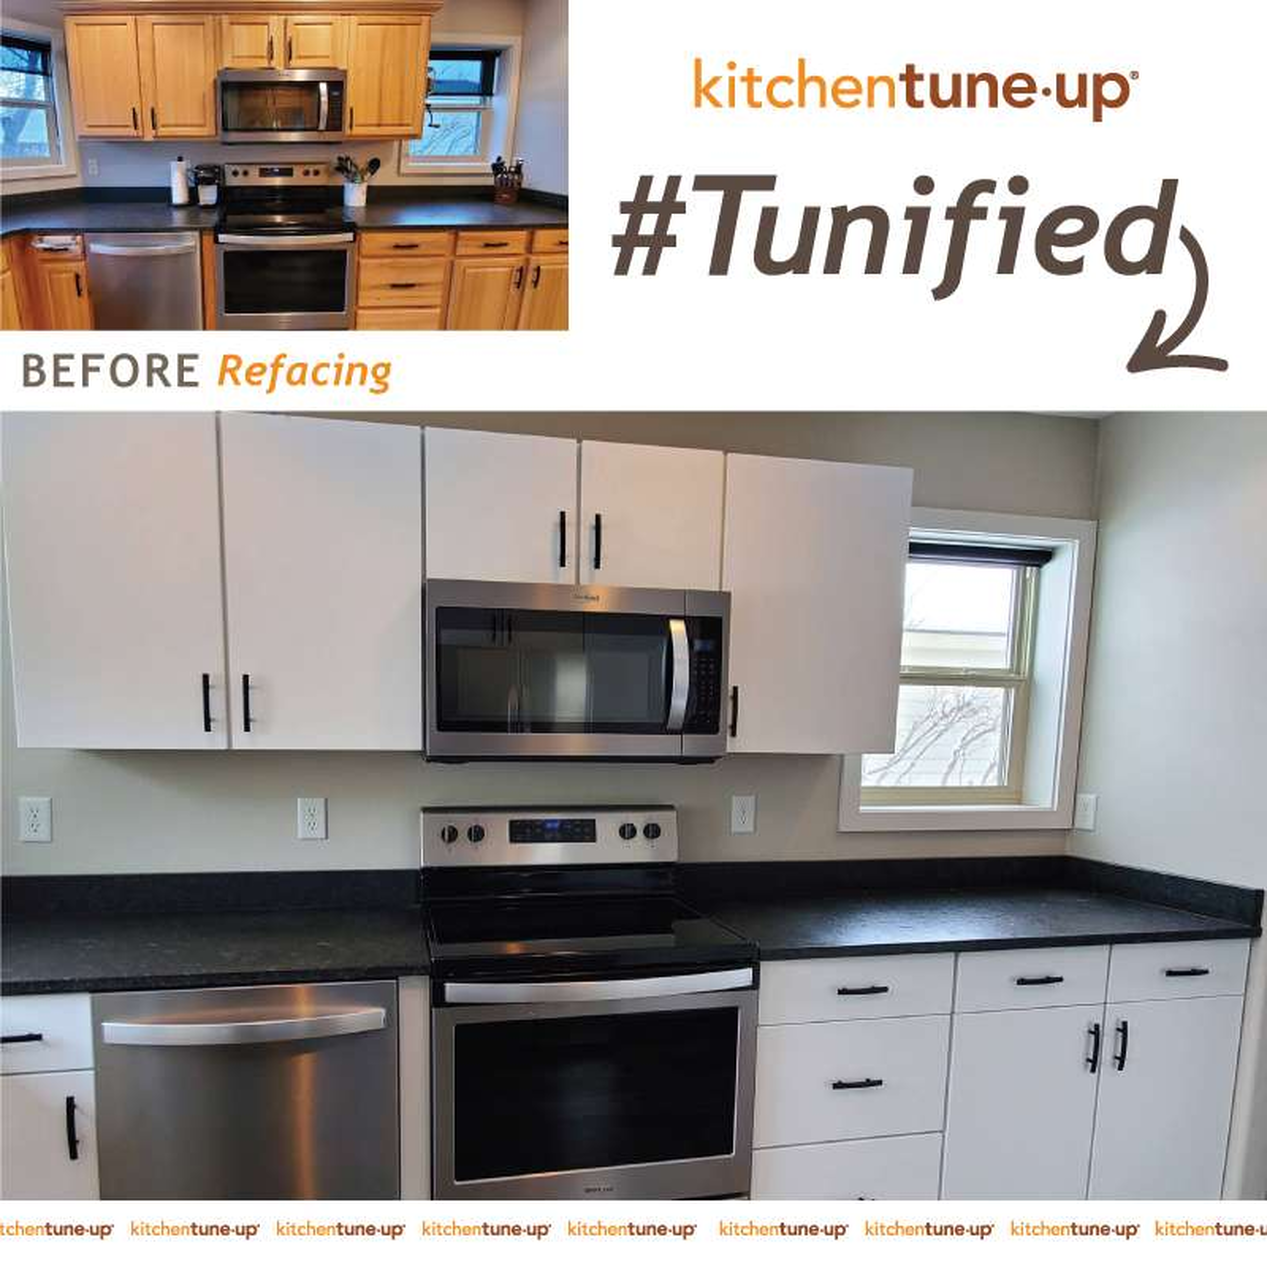 Before & After- Kitchen Remodeling